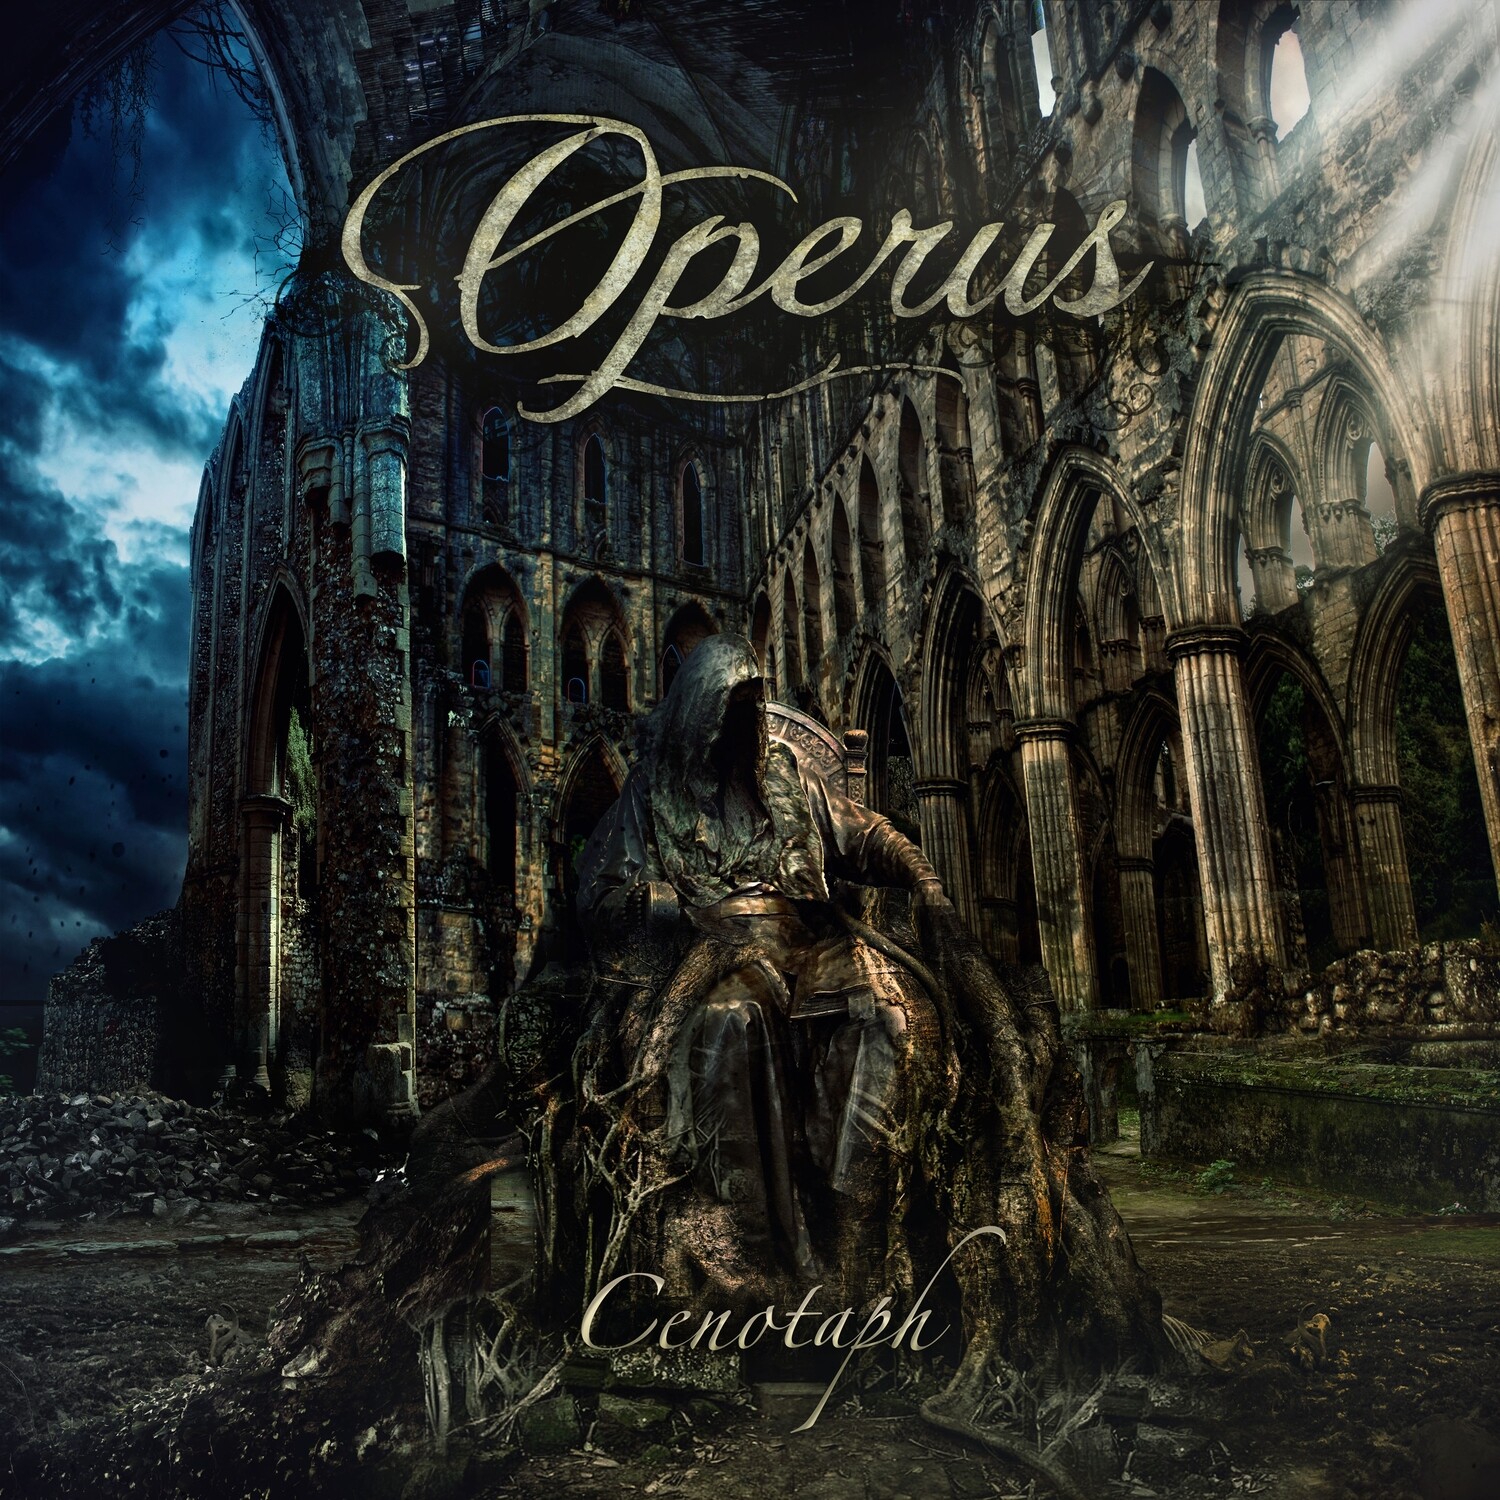 Cenotaph by Operus [CD]